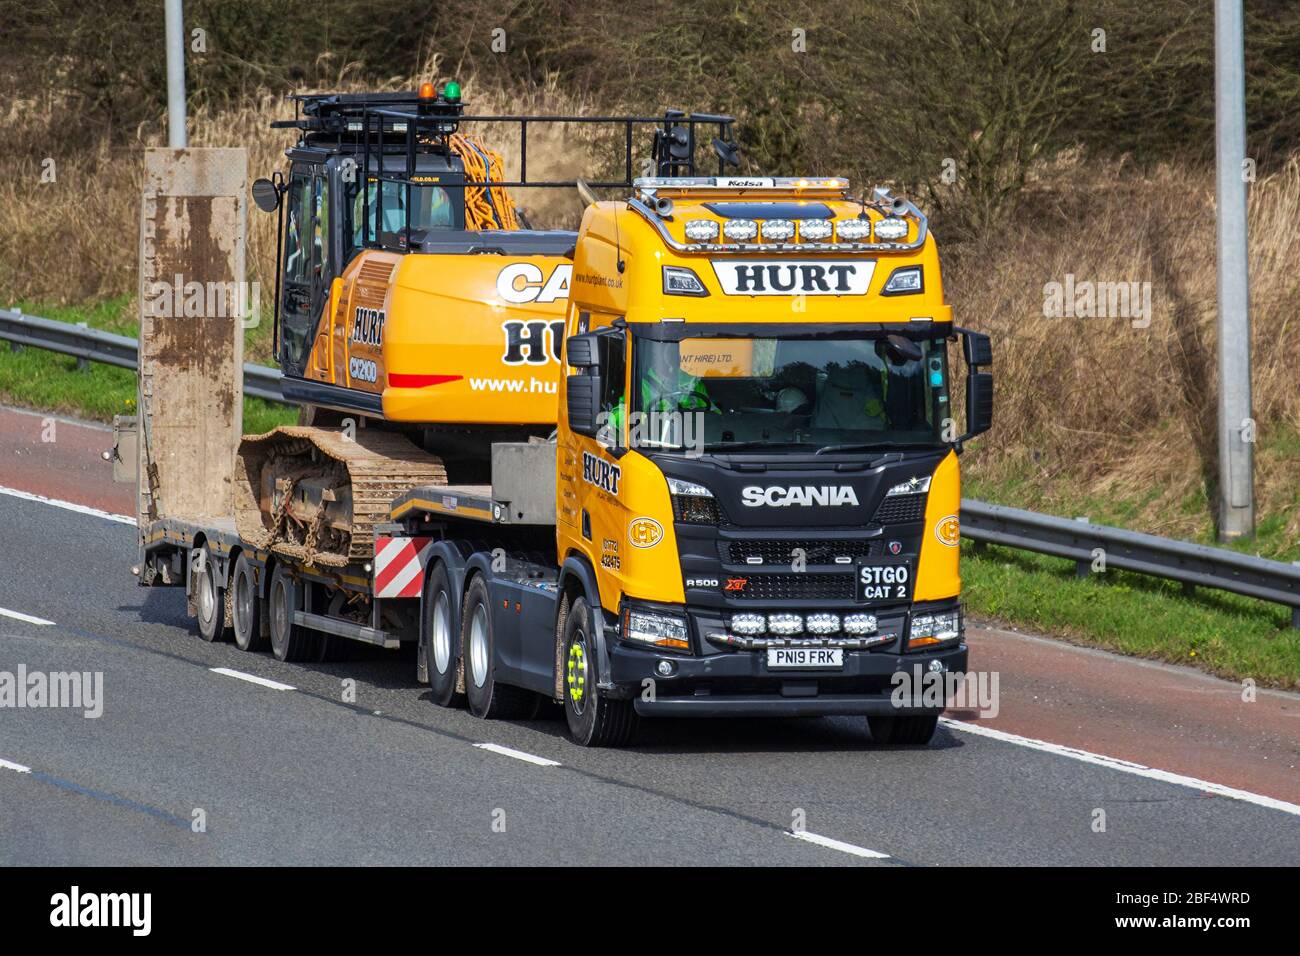 Hurt Plant Hire Ltd Haulage delivery trucks, lorry, transportation, truck, cargo carrier, Scania R500 XT vehicle, European commercial transport, industry, M6 at Manchester, UK Stock Photo